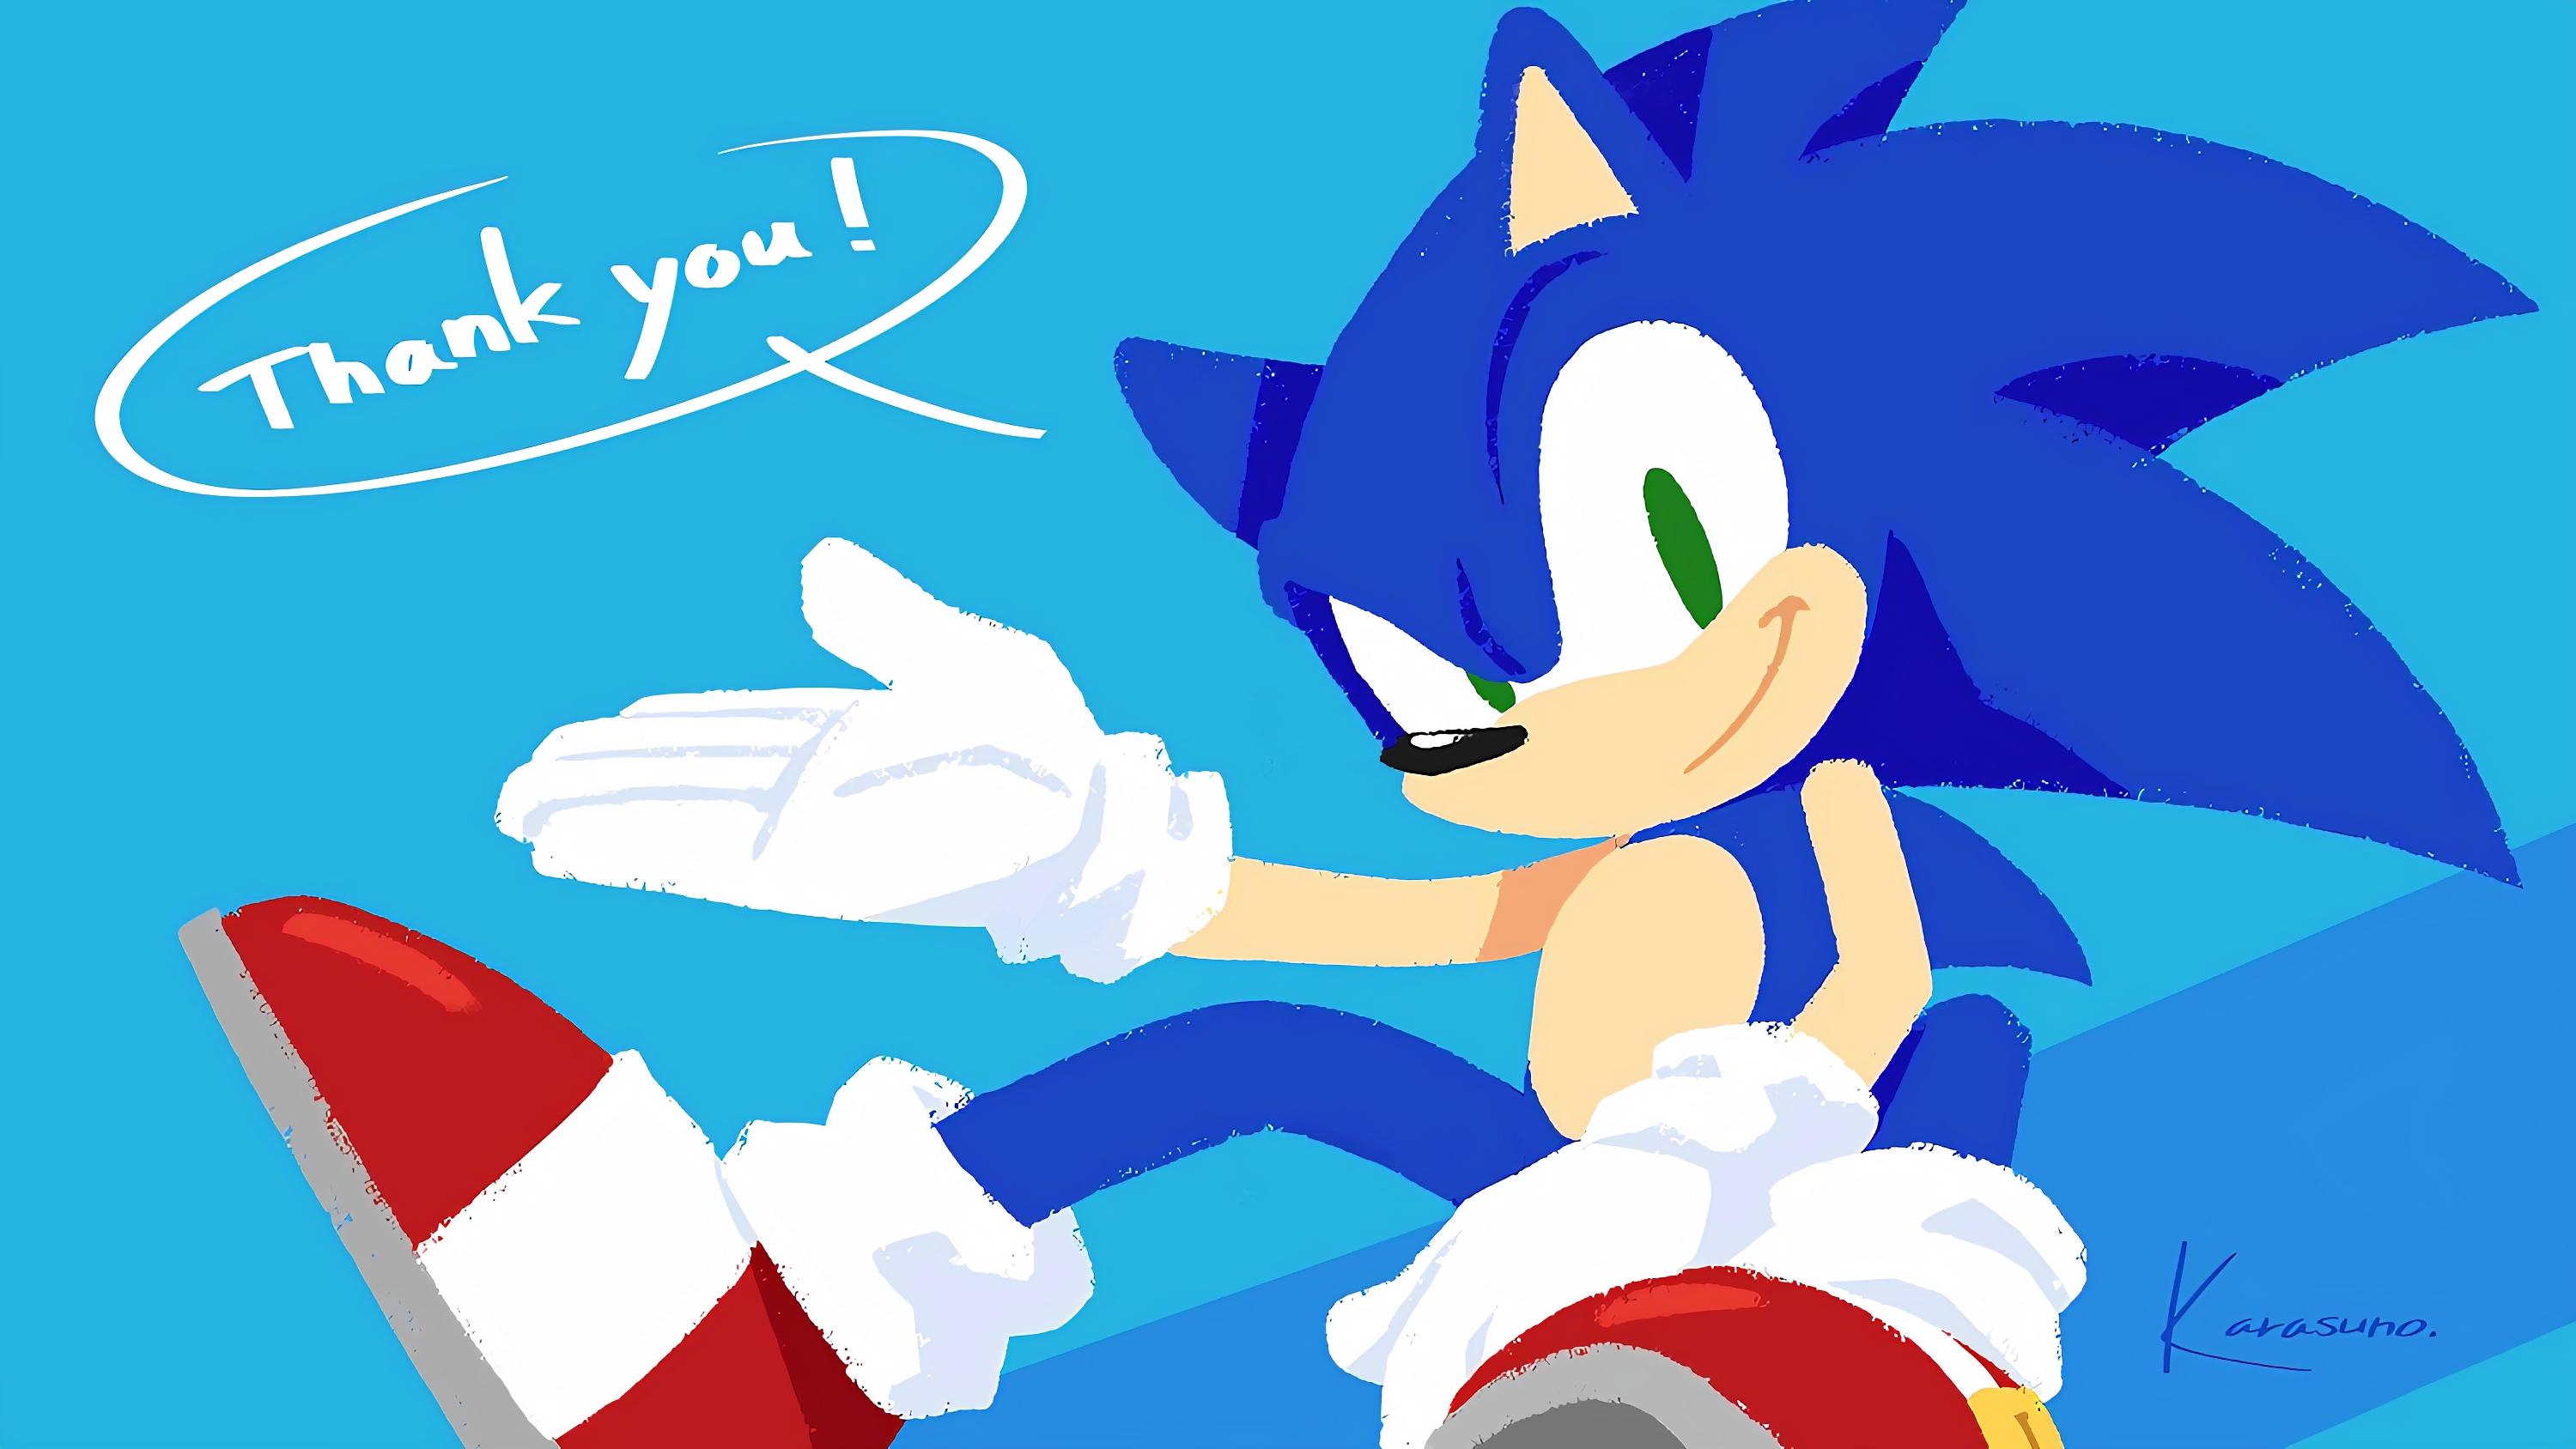 General 3000x1688 Yui Karasuno Anthro Sonic Sonic the Hedgehog Sega video game art video game characters PC gaming simple background blue background artwork video games